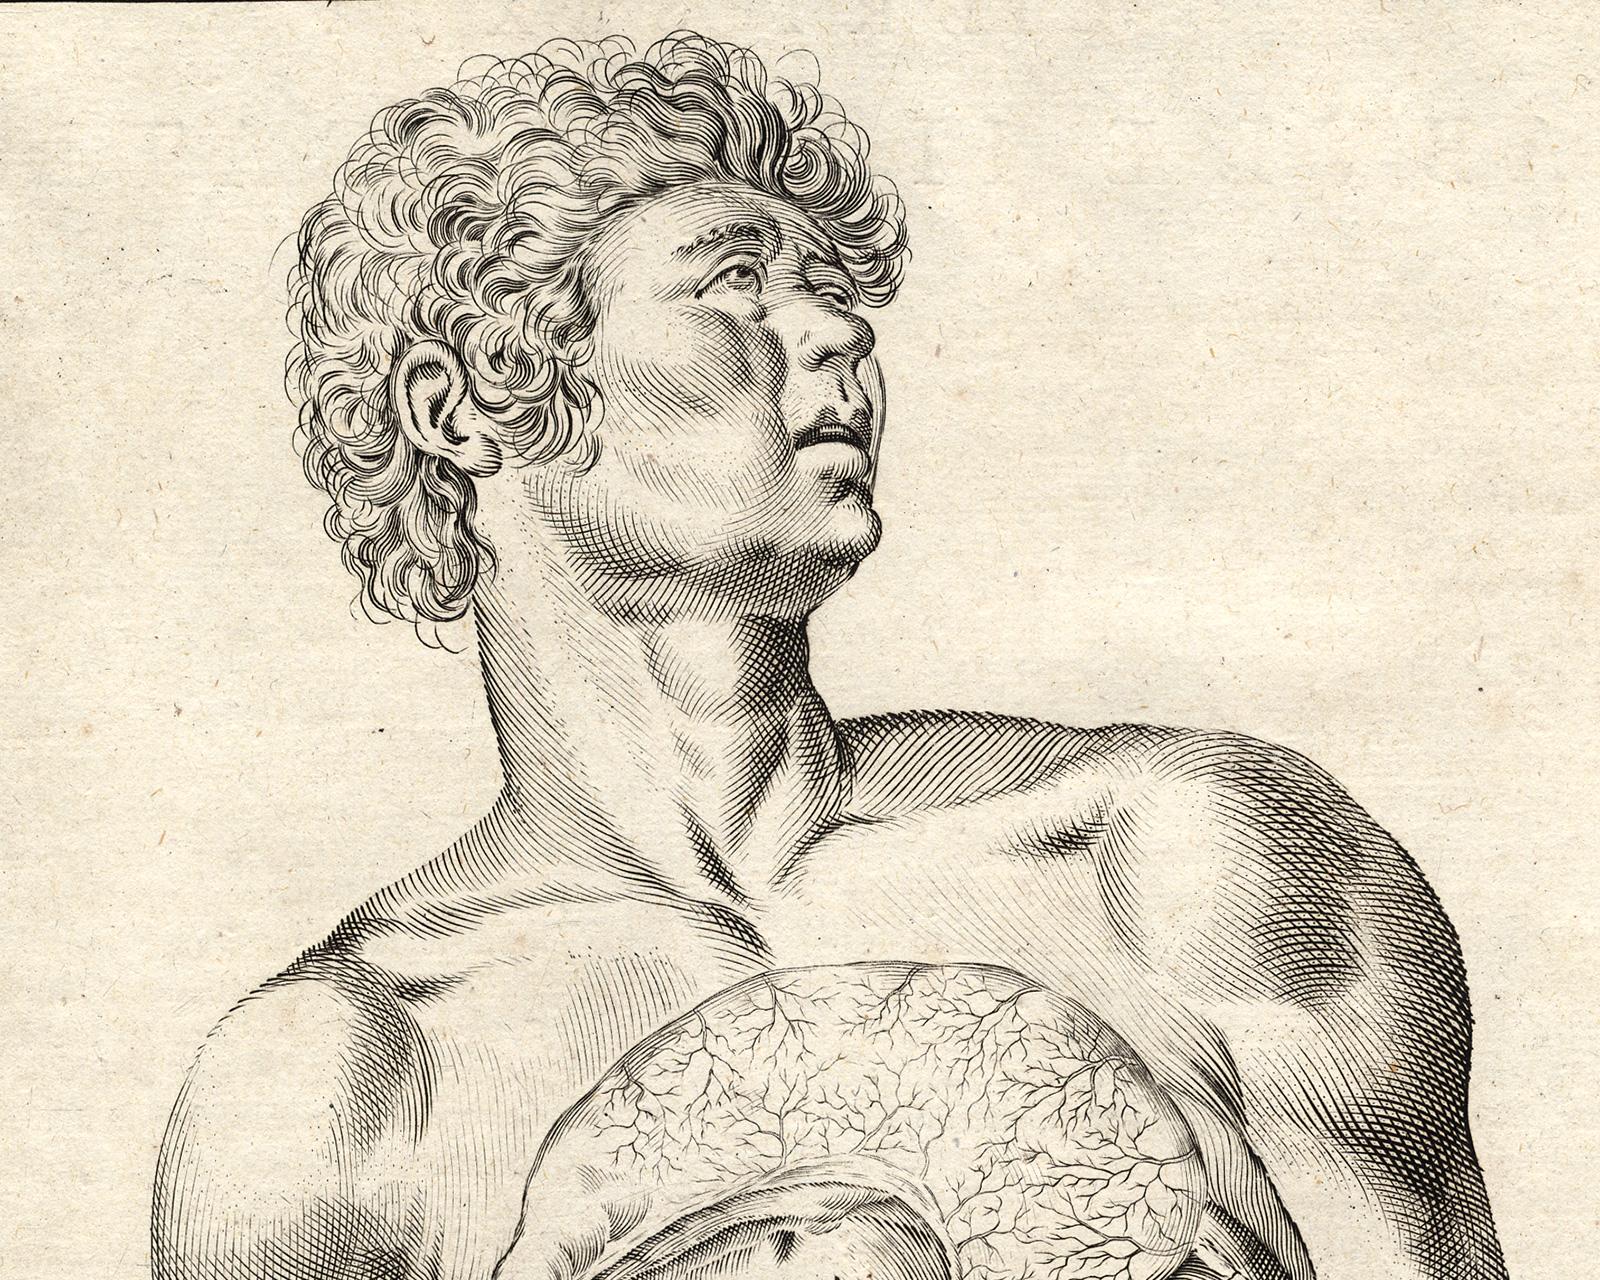 Rare anatomical print - Male abdomen by Spigelius - Engraving - 17th century - Old Masters Print by Adrianus Spigelius